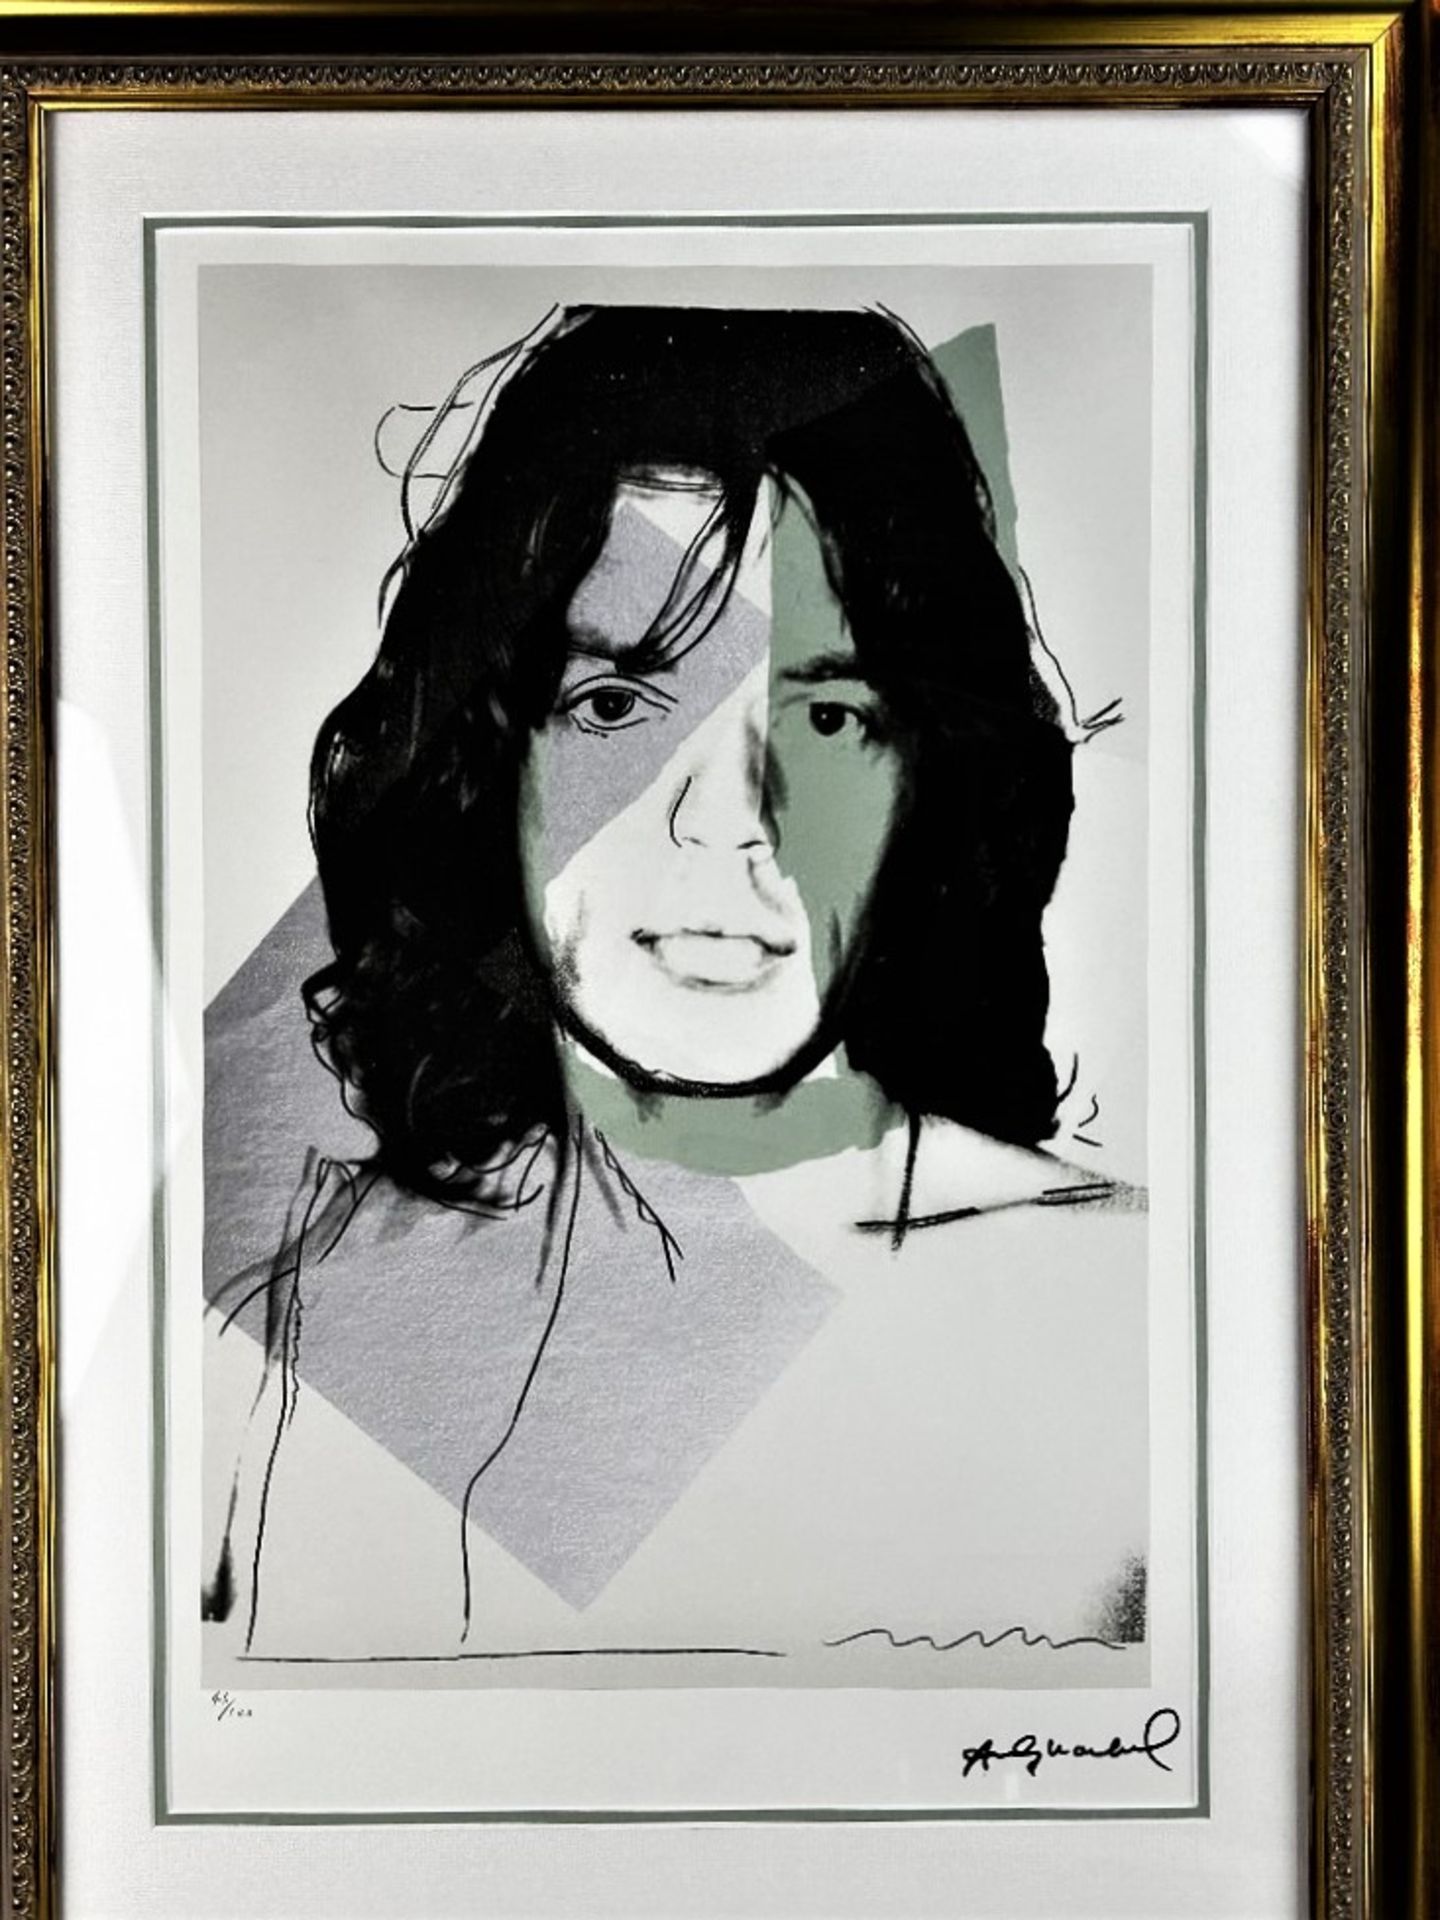 Andy Warhol-(1928-1987) "Jagger" Numbered Lithograph - Image 2 of 7